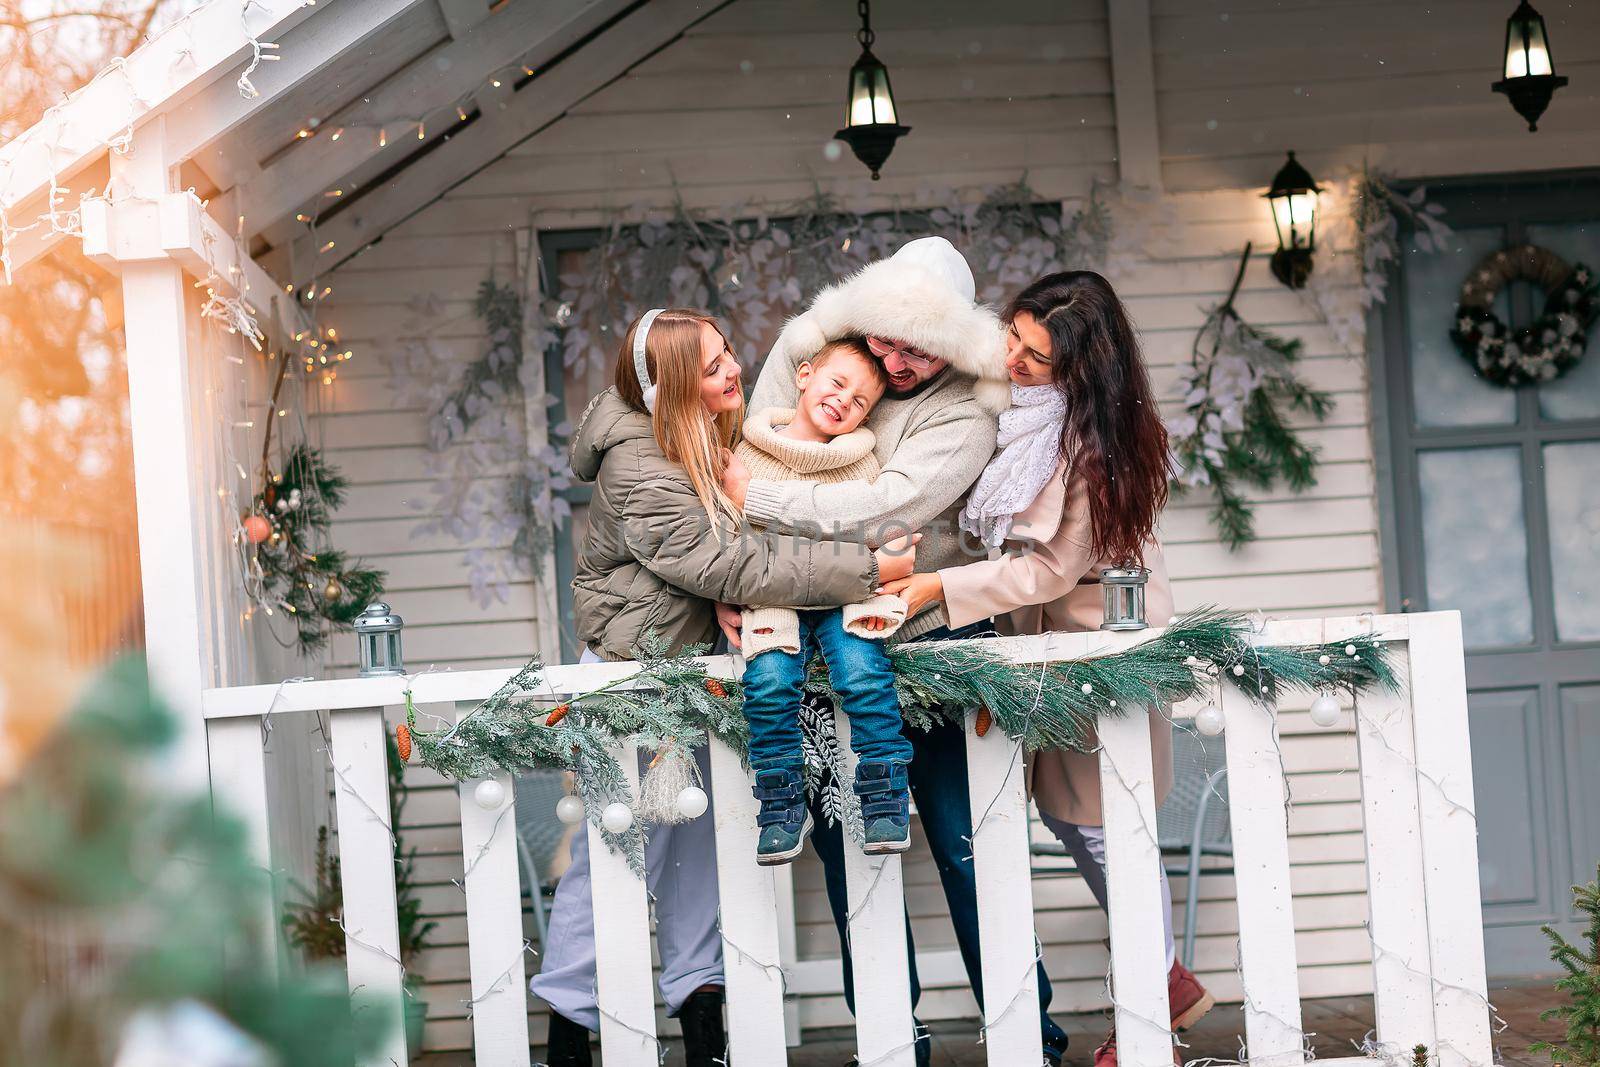 Happy family on the porch of the Christmas decorated house outdoor by Len44ik